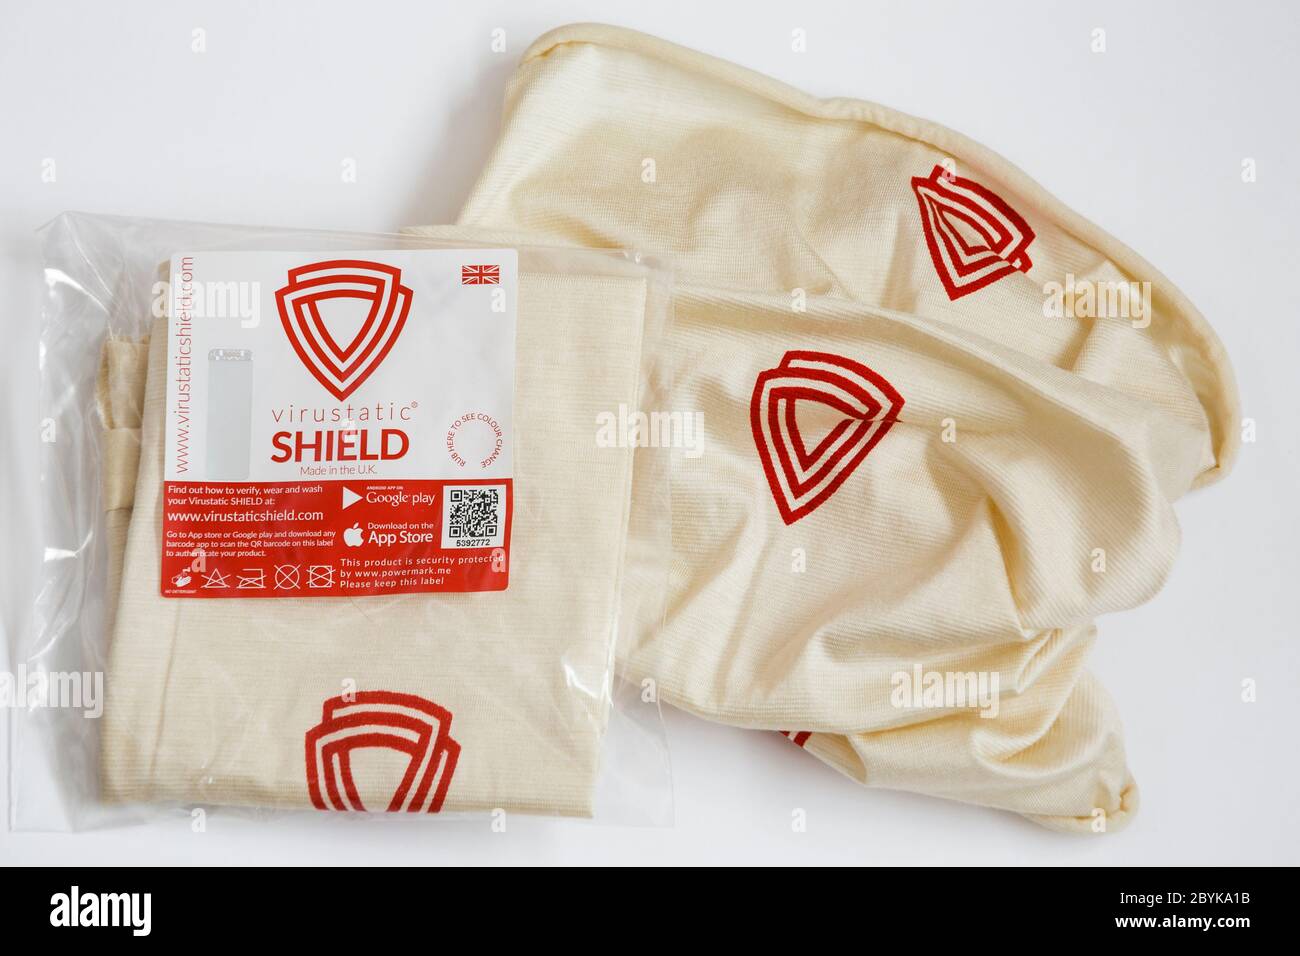 Virustatic Shield face covering mask snood for protection against new Covid 19 and corona viruses with QR code on packet for authentication UK Britain Stock Photo